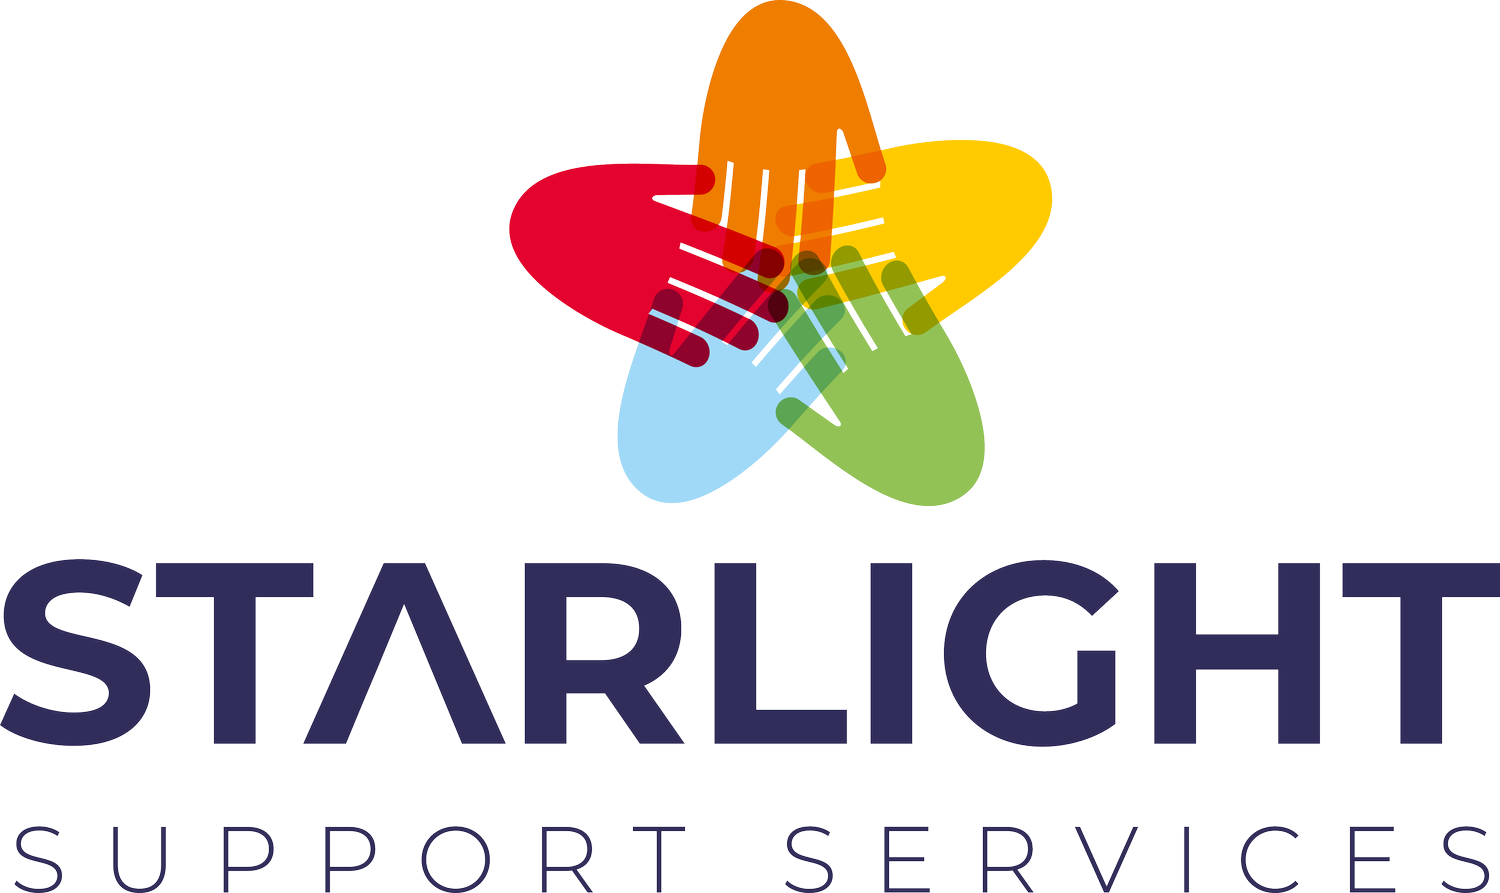 Starlight support services - Children Homes- Domiciliary care  -  Supported living - Supported accommodation - Healthcare Birmingham 